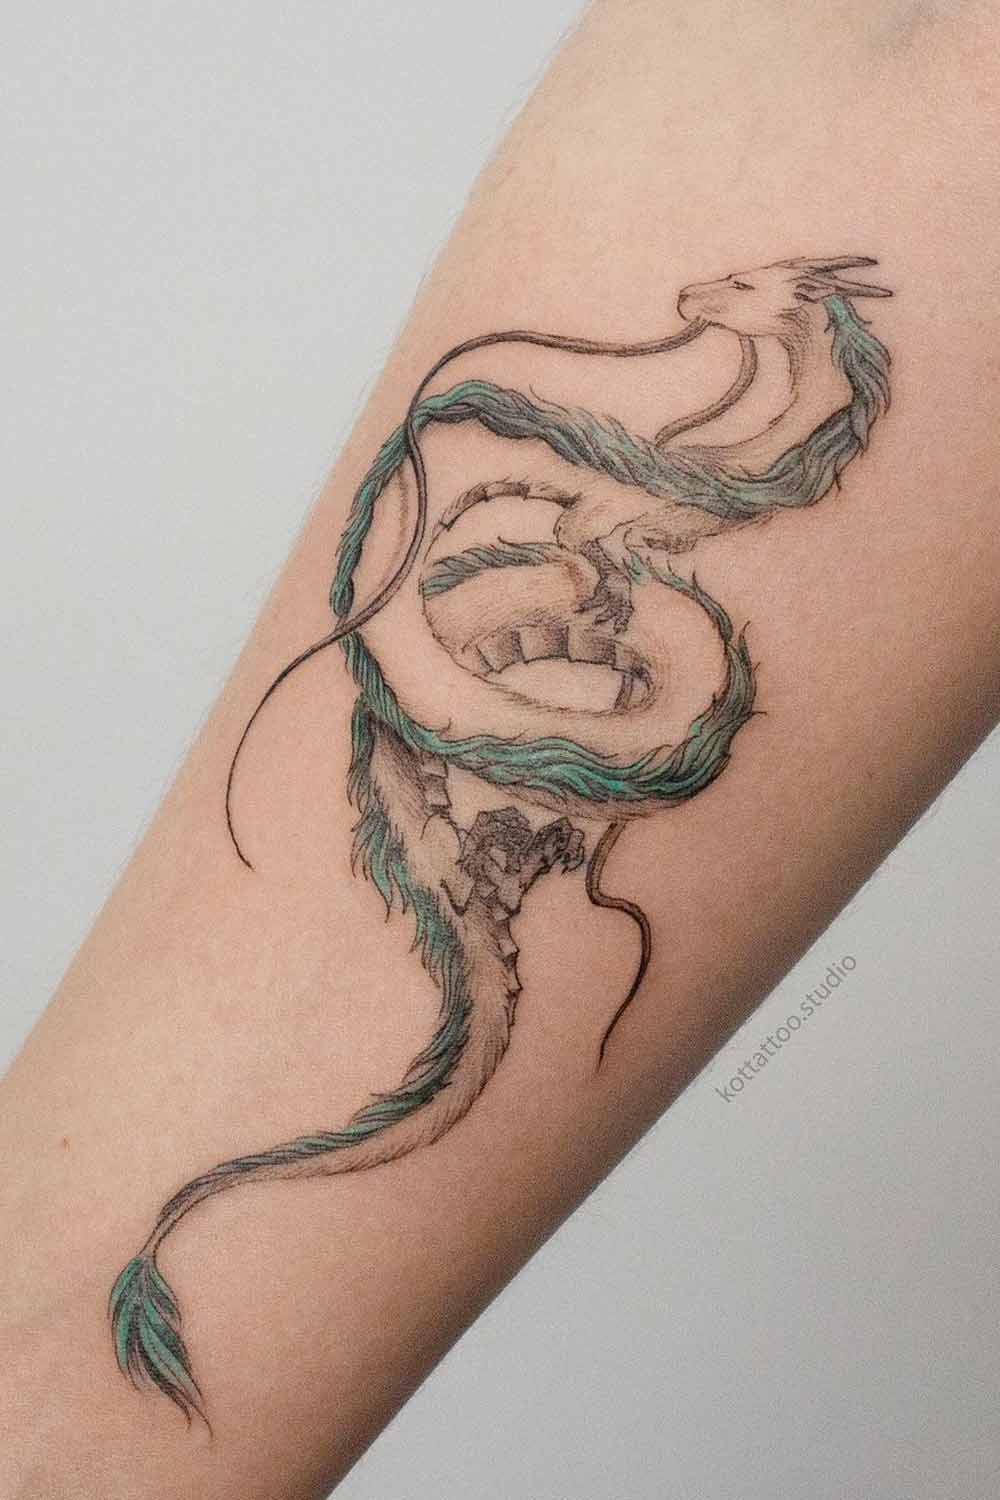 Arm Tattoo with Japanese Dragon